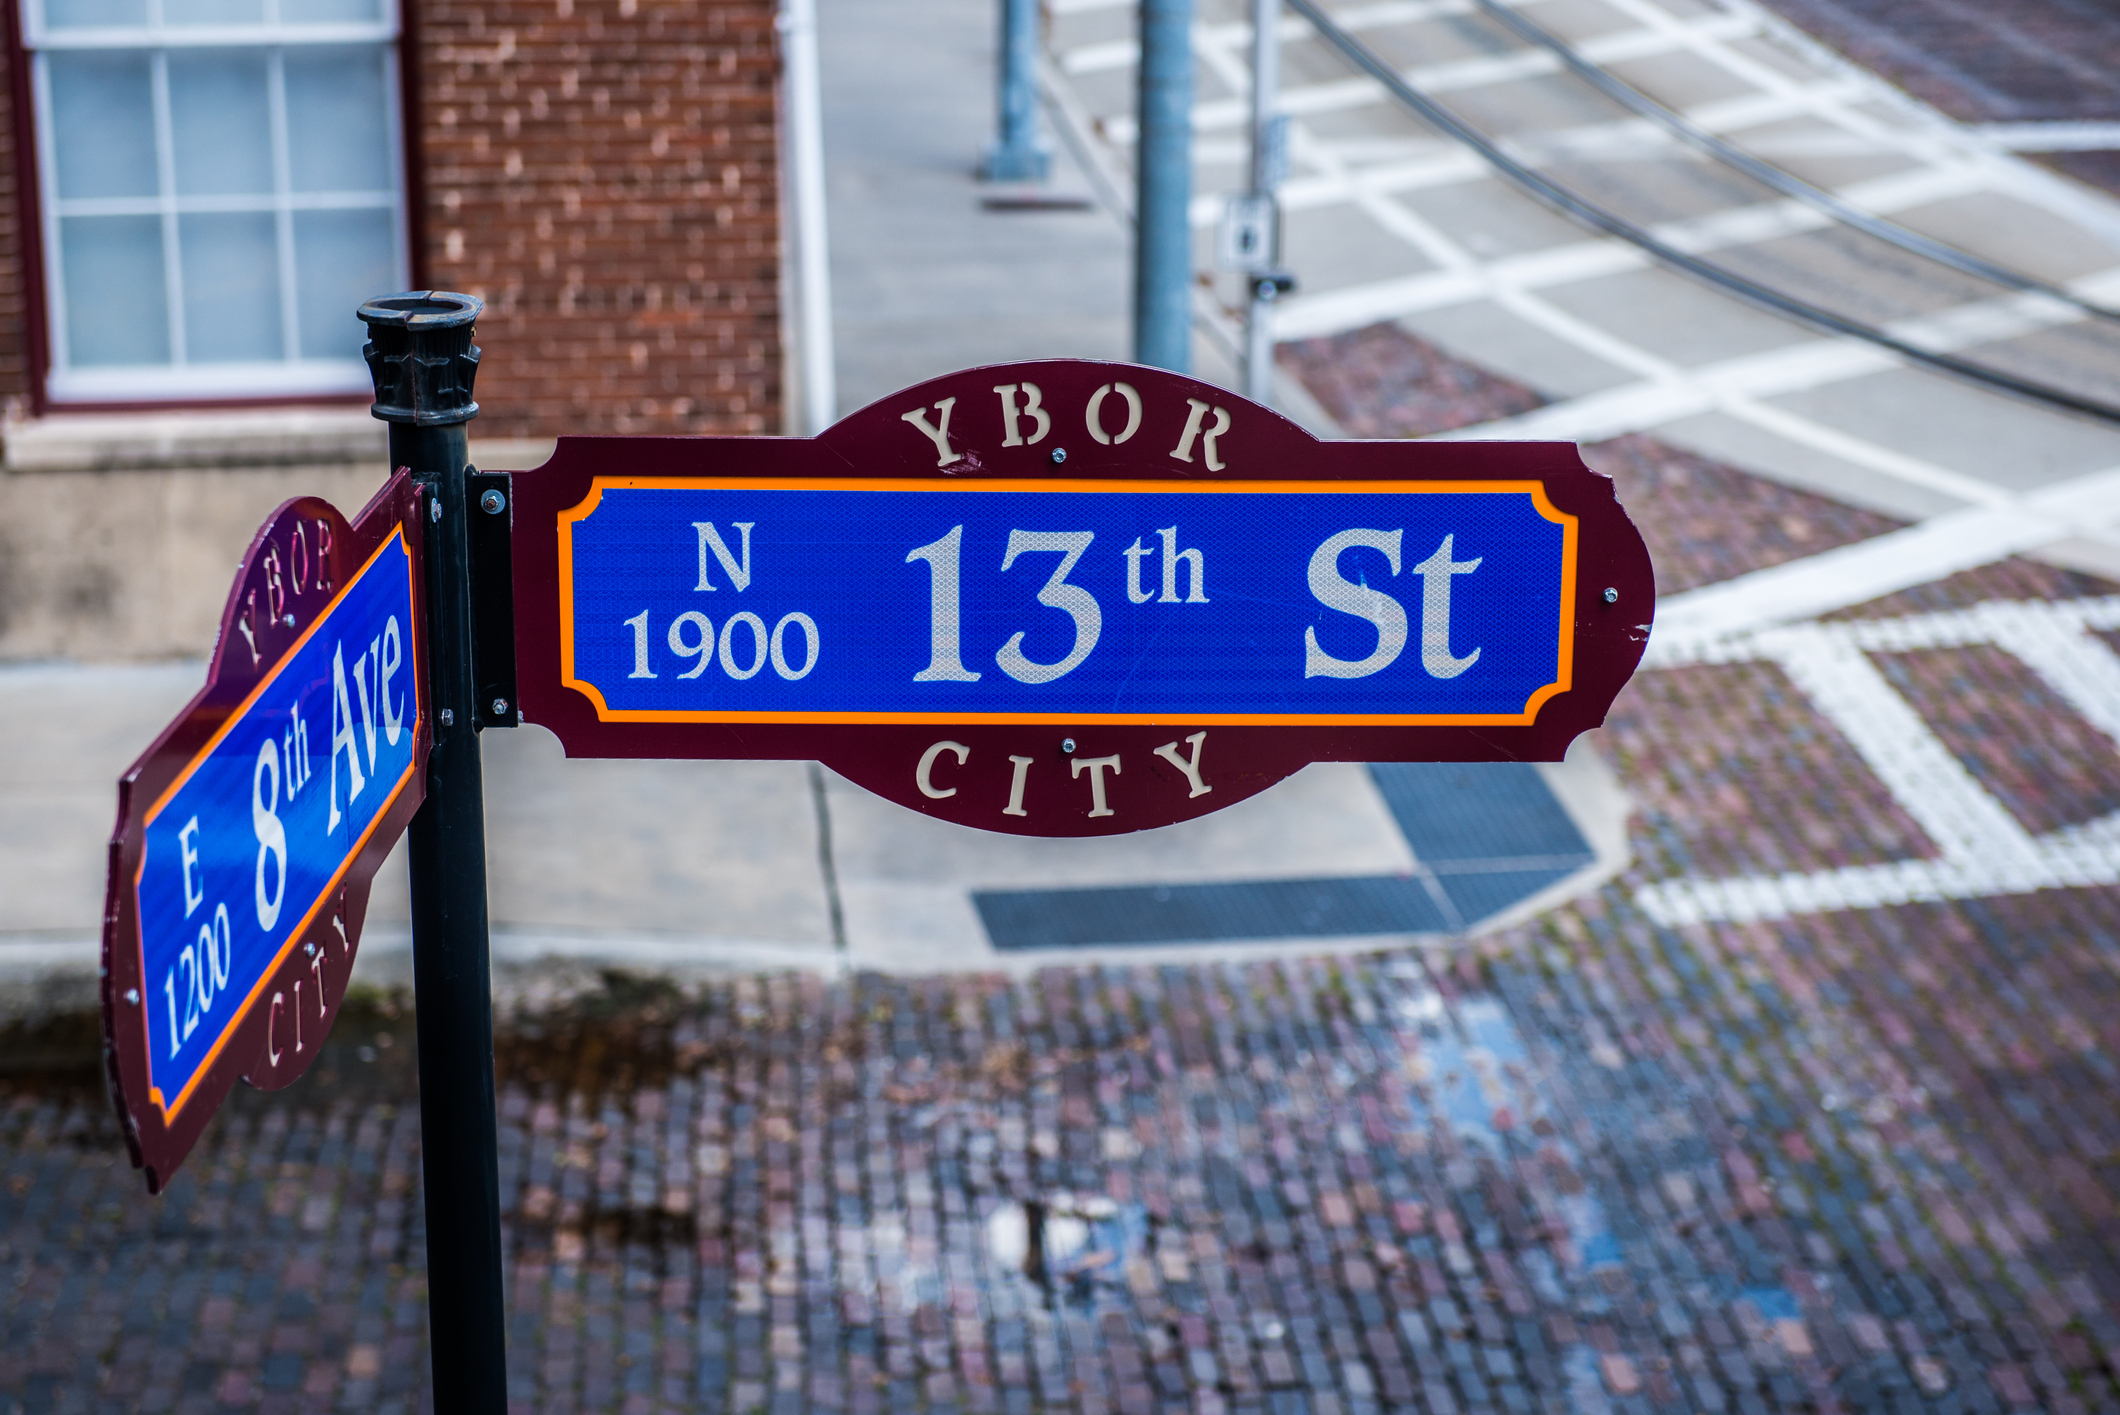 Photo of a street sign in the Ybor City historic district in Tampa Florida.